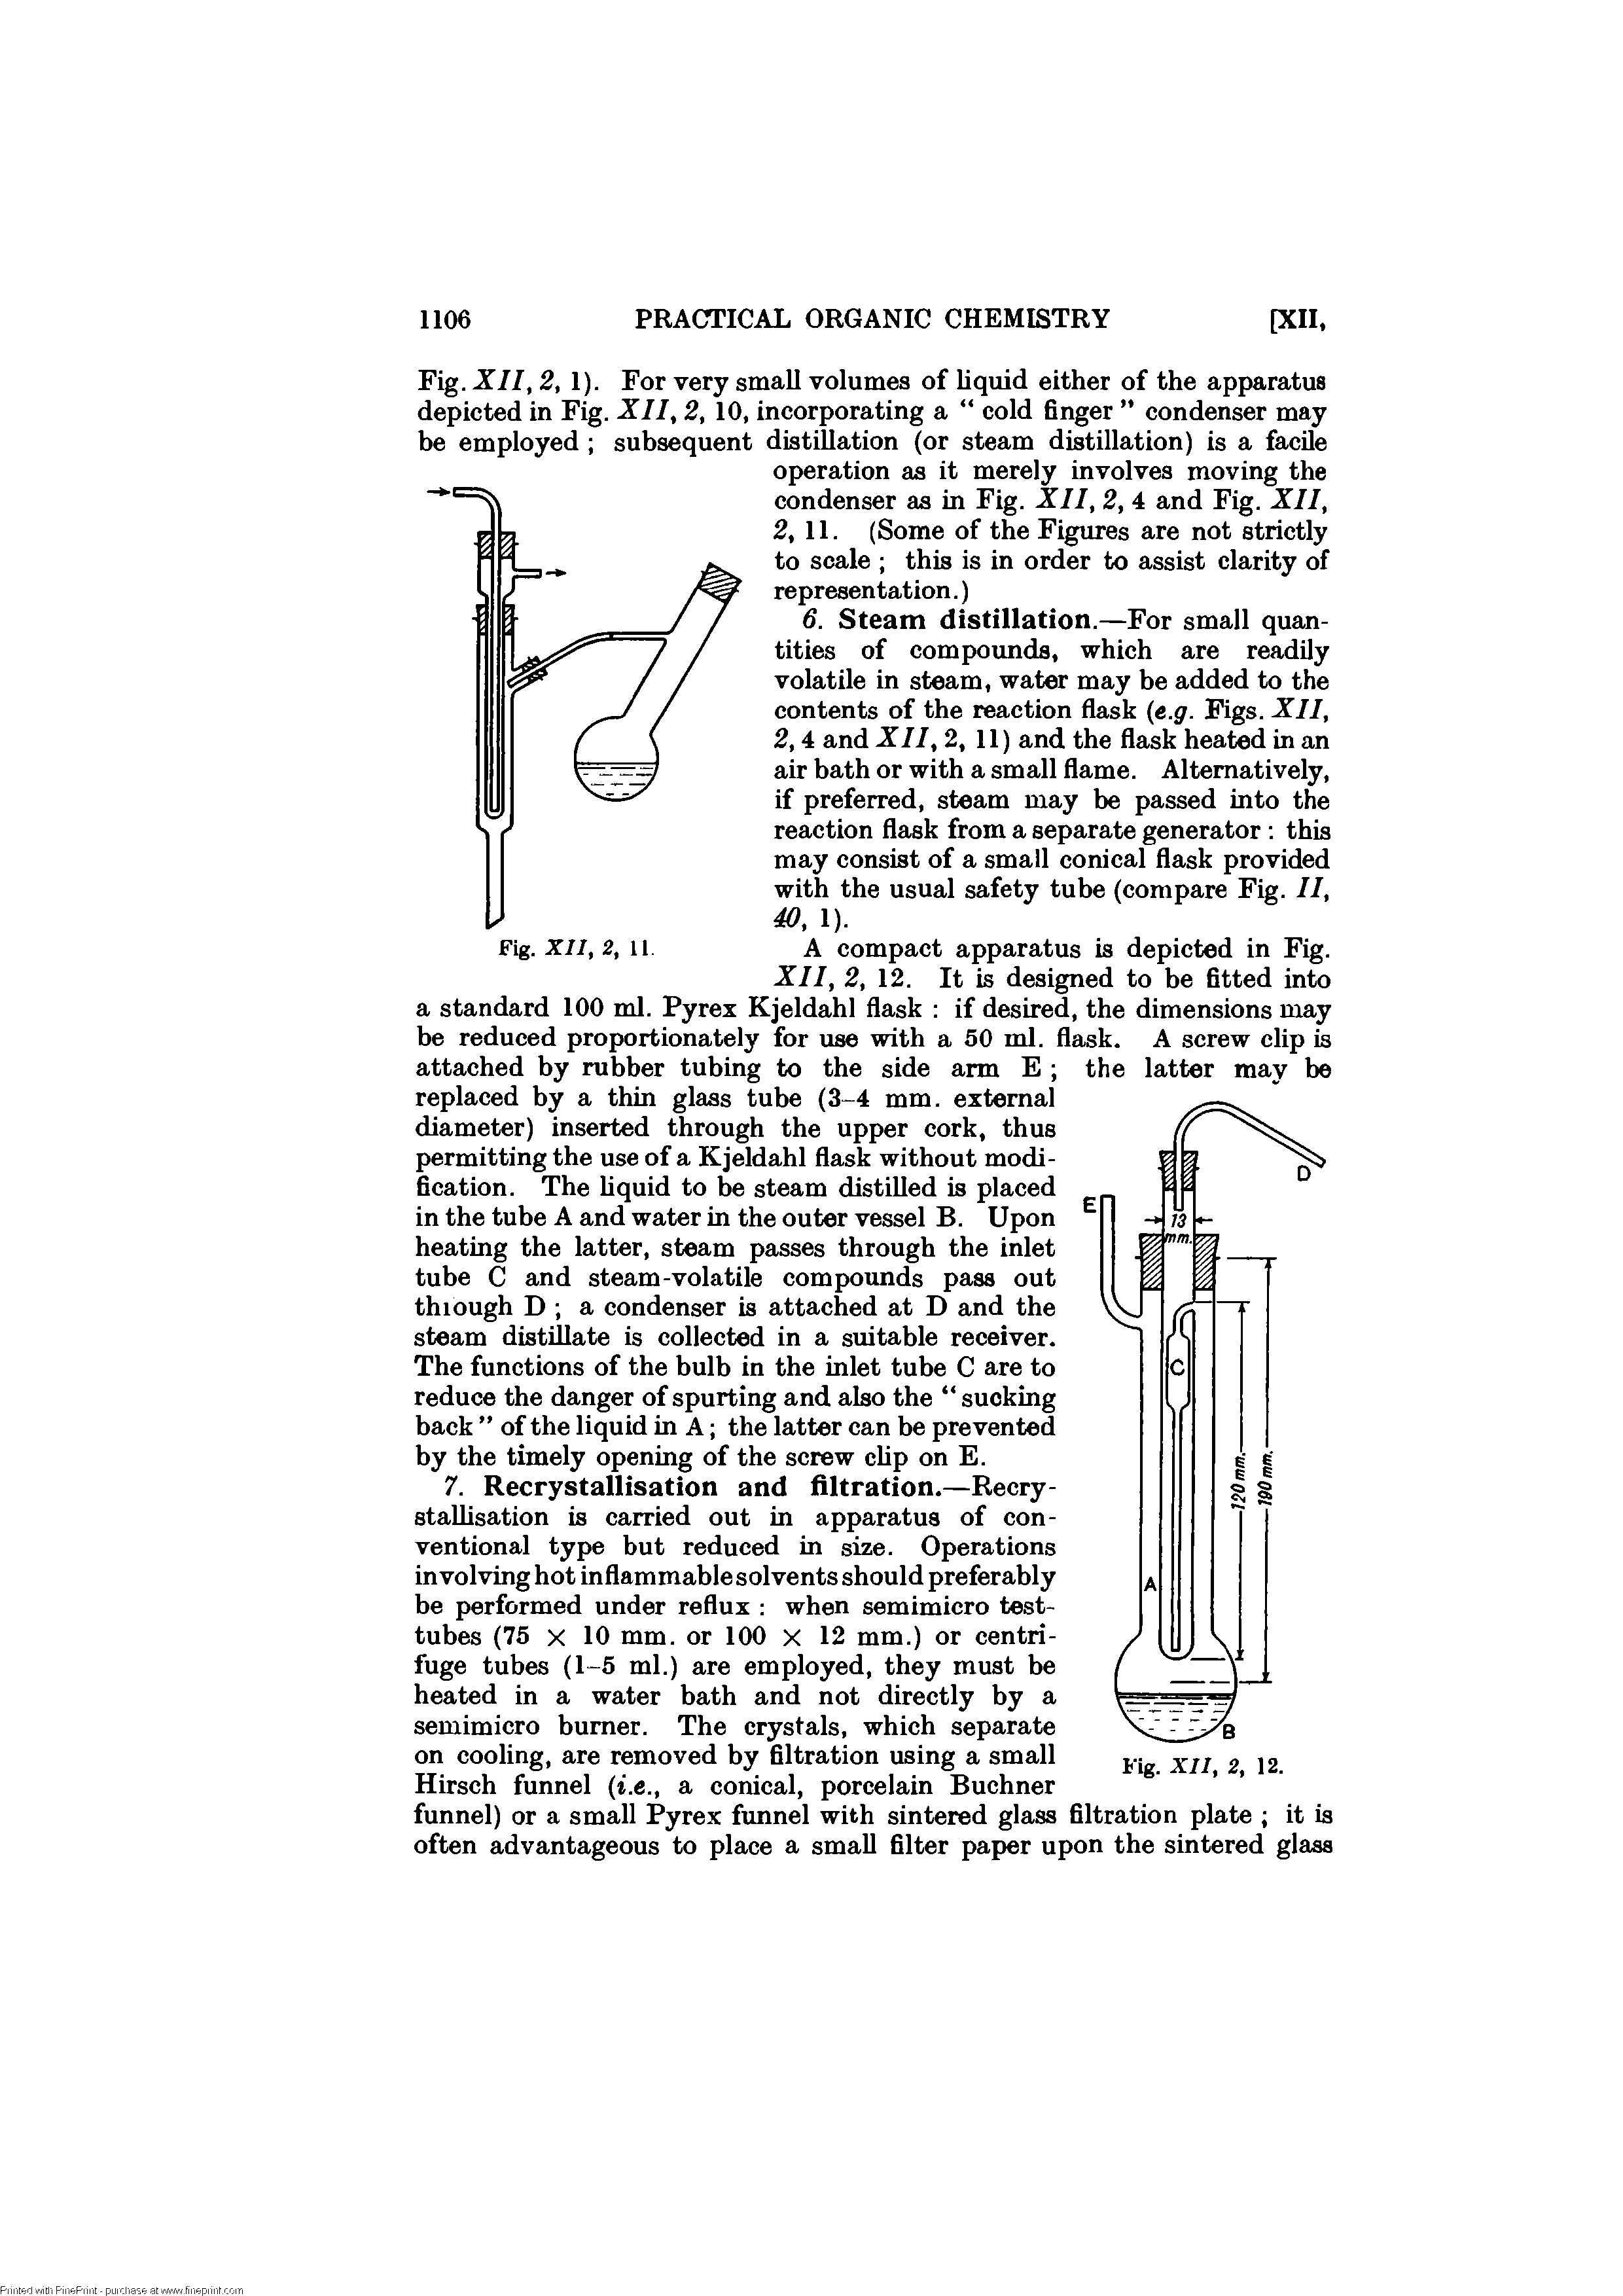 Fig. XII, 2, 1). For very small volumes of liquid either of the apparatus depicted in Fig. XII, 2, 10, incorporating a cold finger condenser may be employed subsequent distillation (or steam distillation) is a facile...